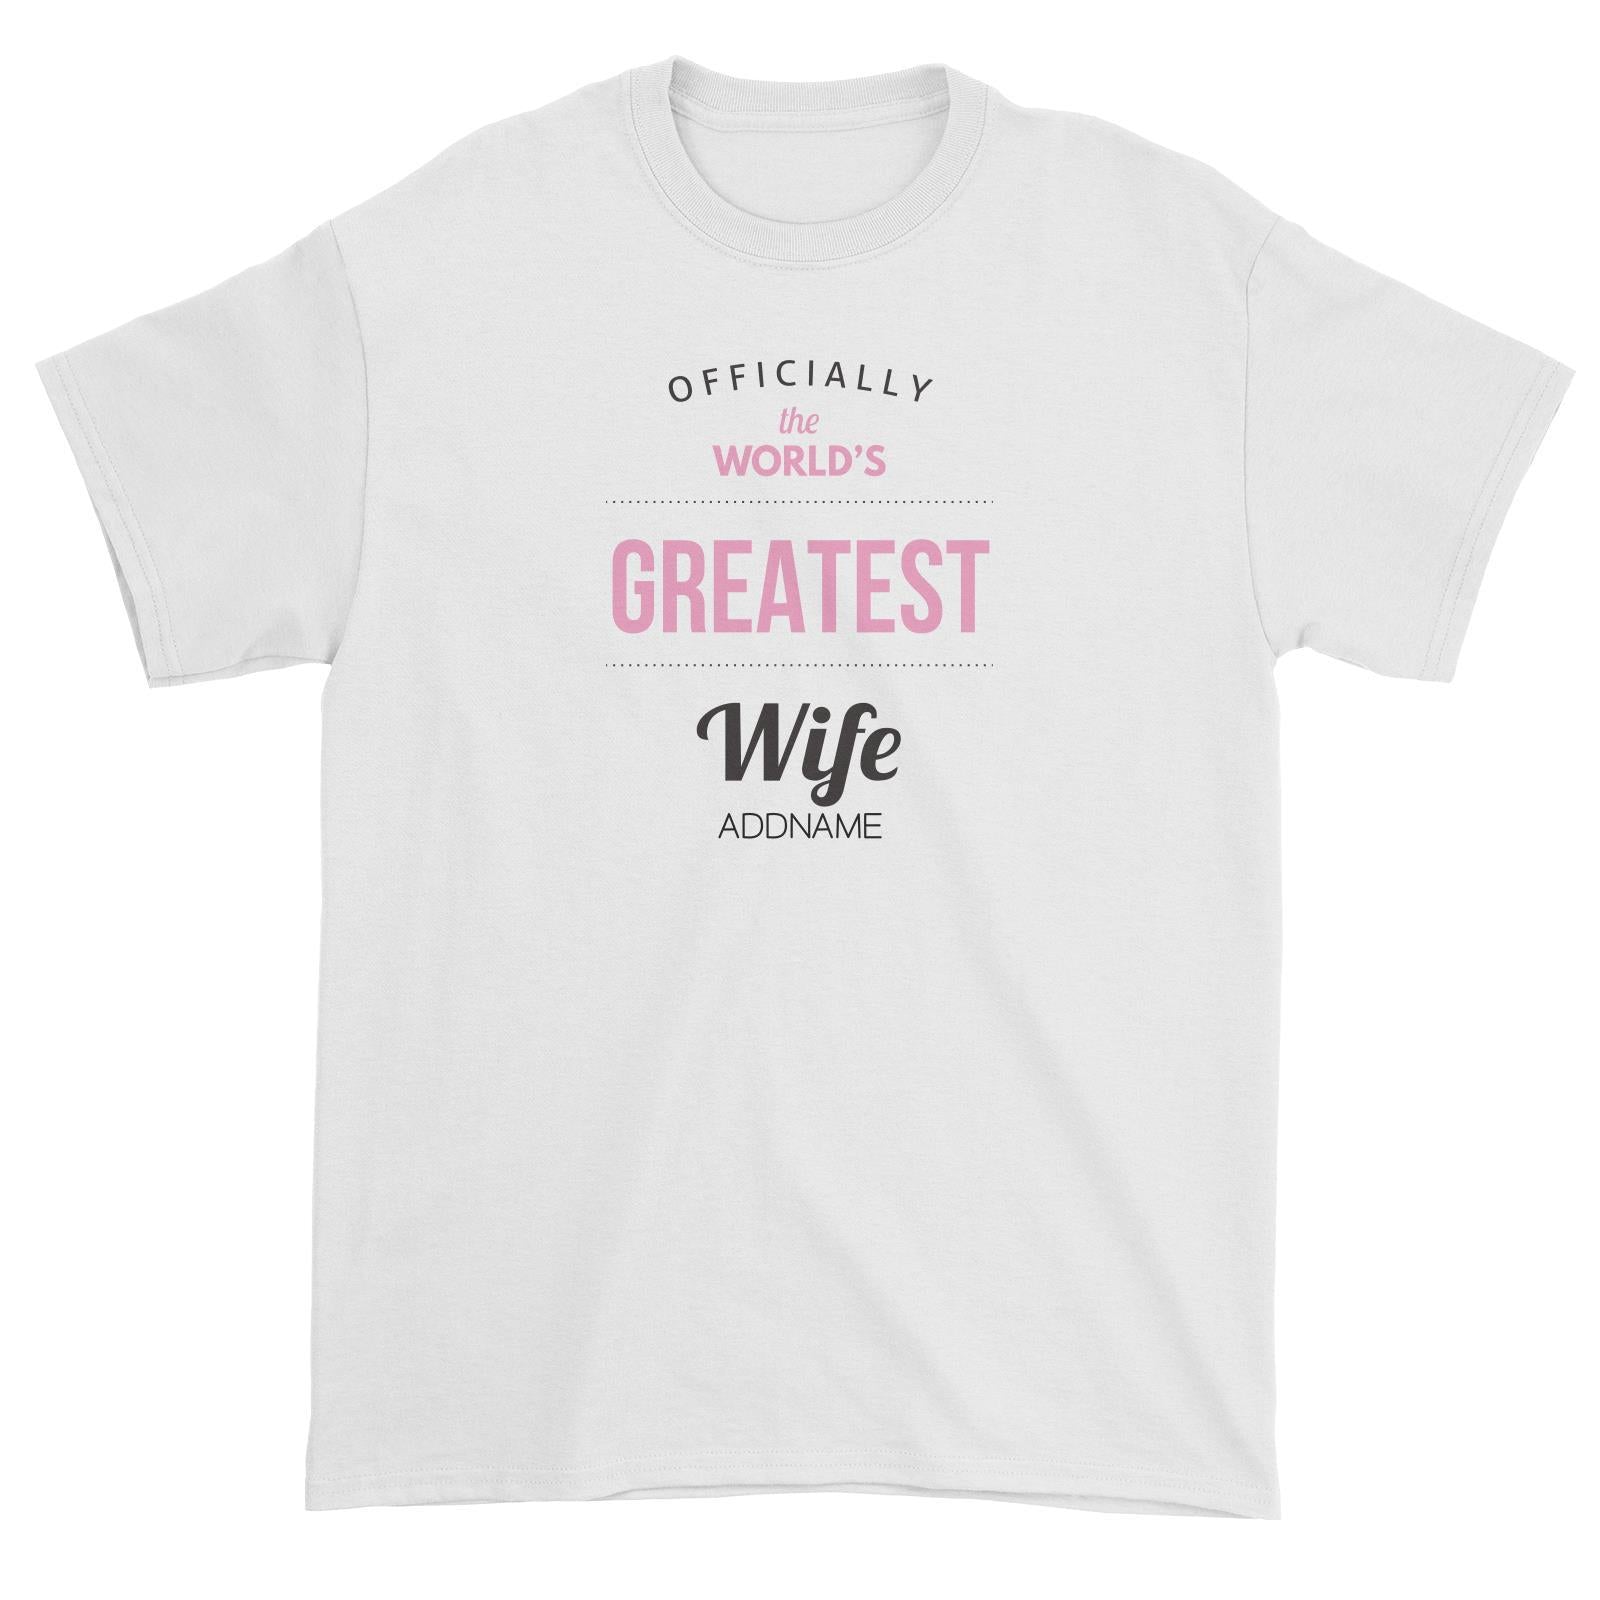 Husband and Wife Officially The World's Geatest Wife Addname Unisex T-Shirt